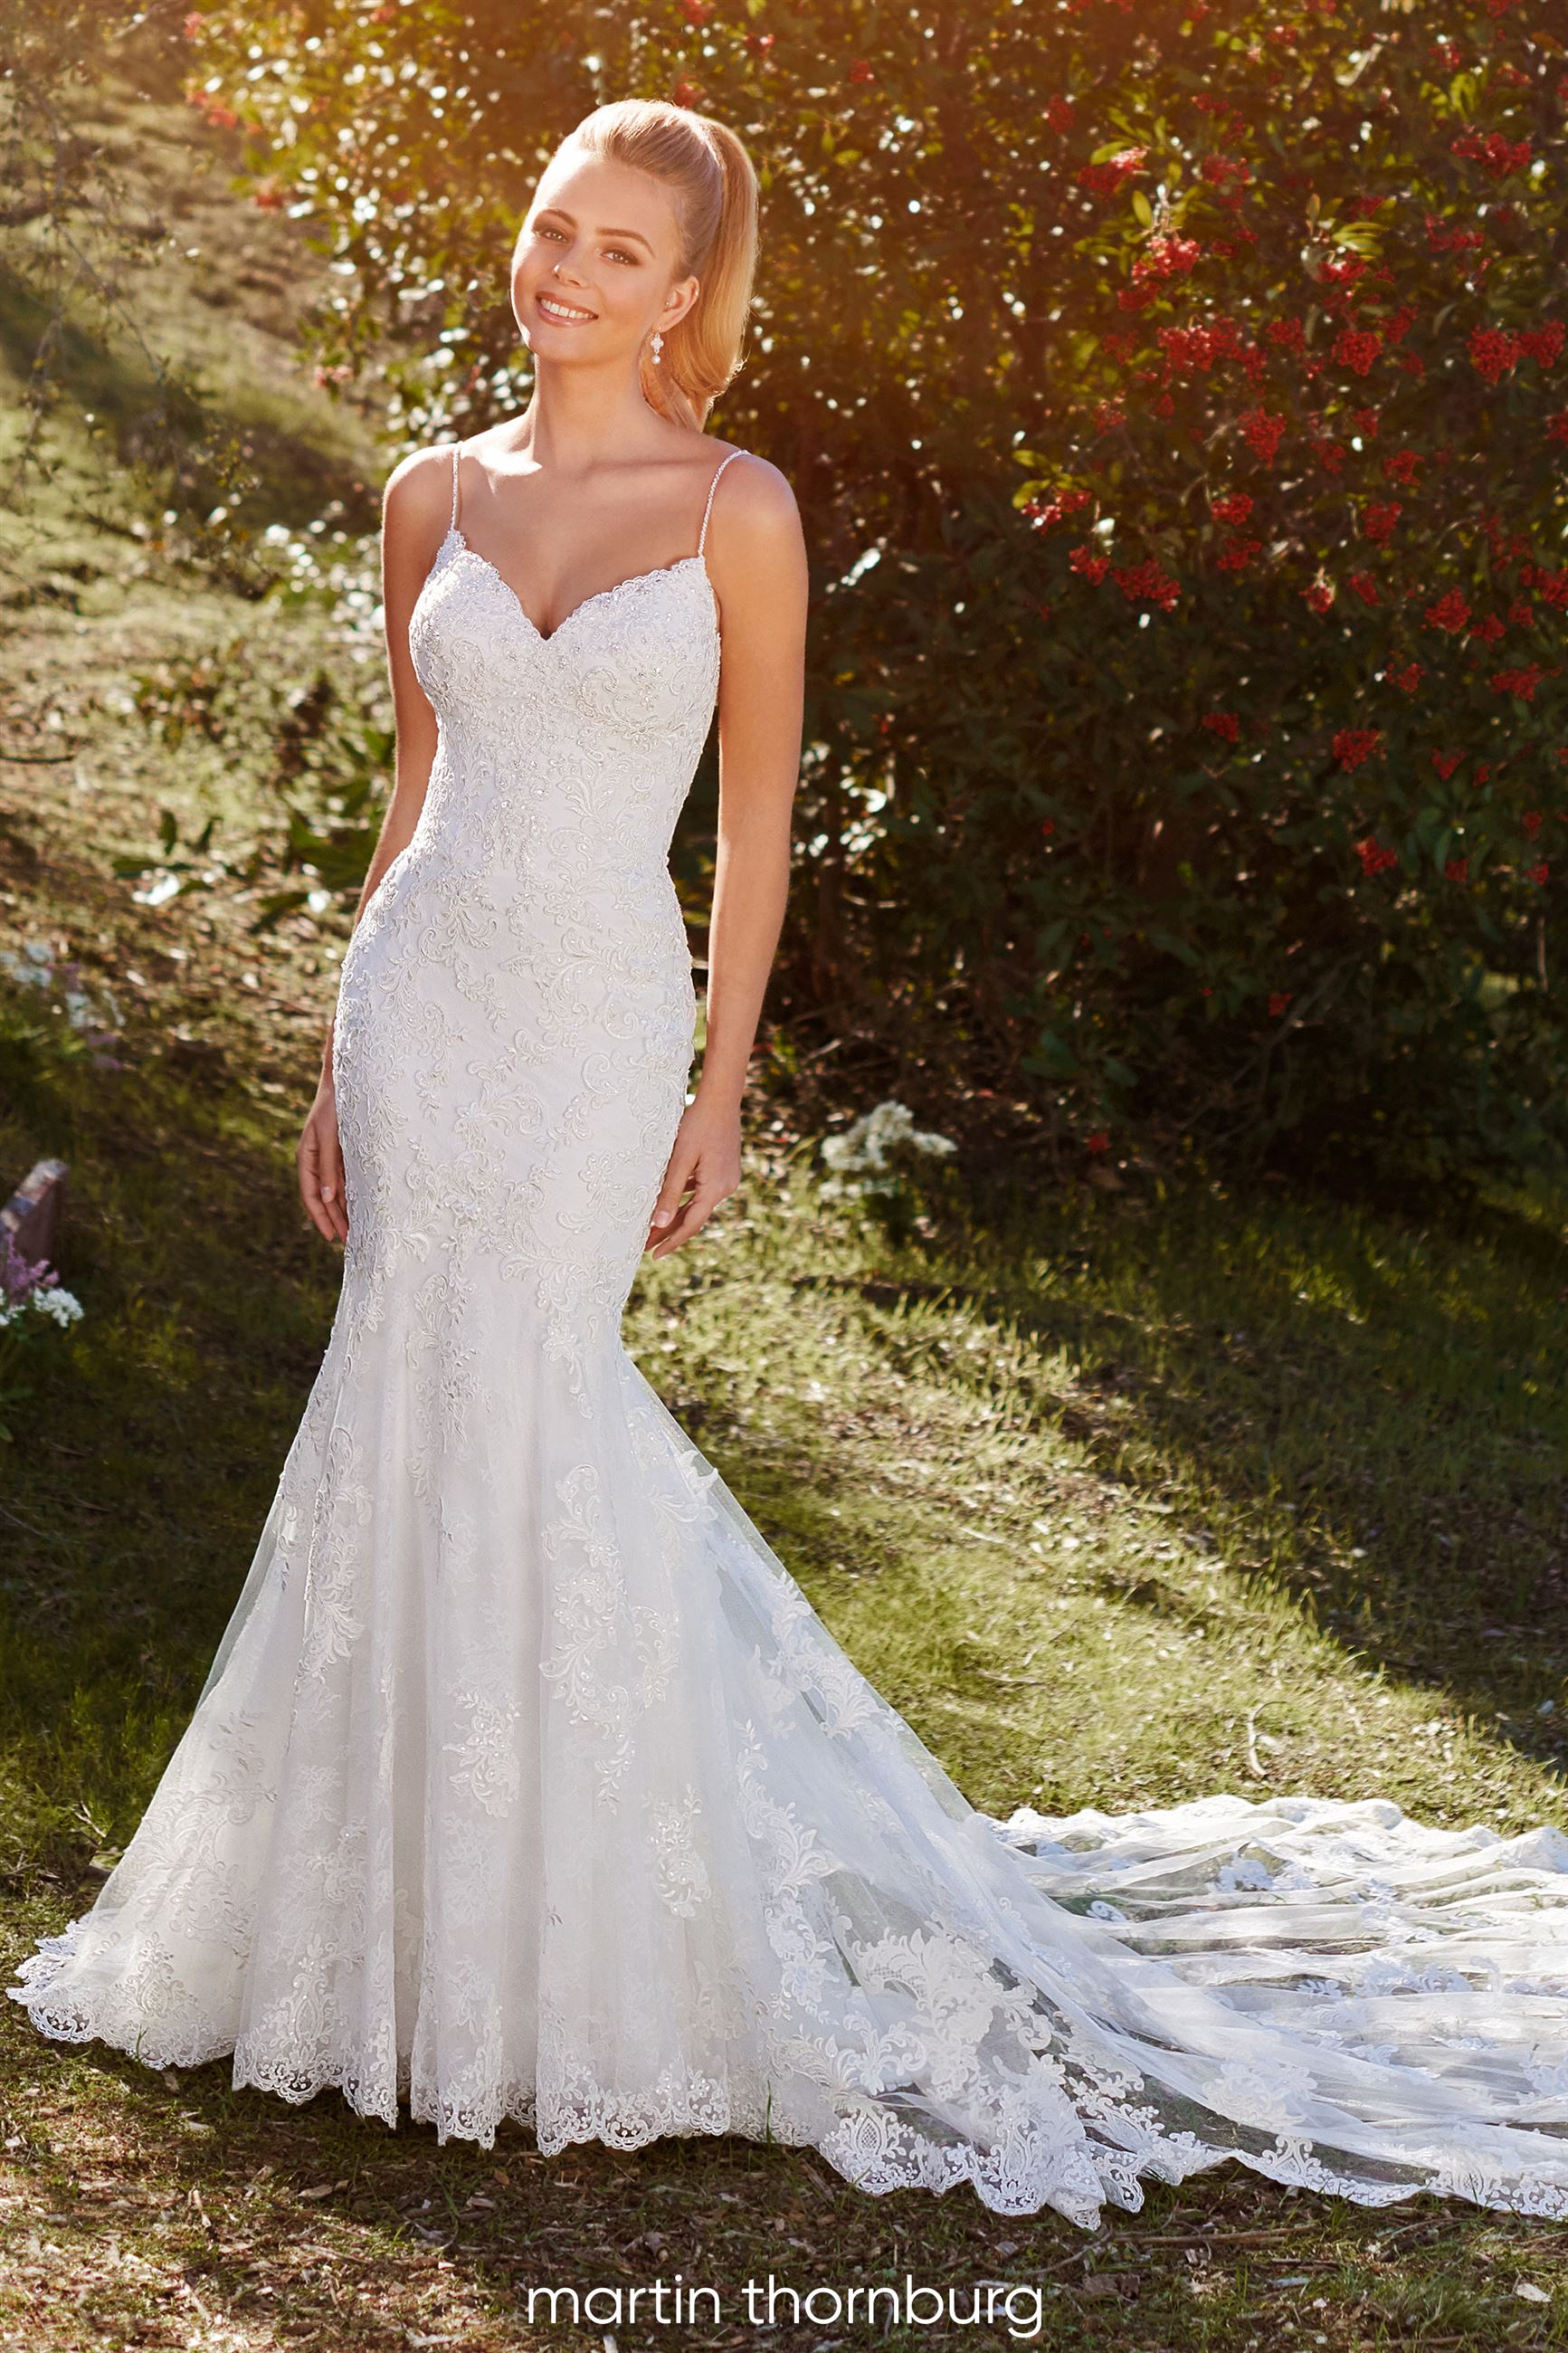 Finding the Perfect Wedding Dress for a Petite Bride + FAQs